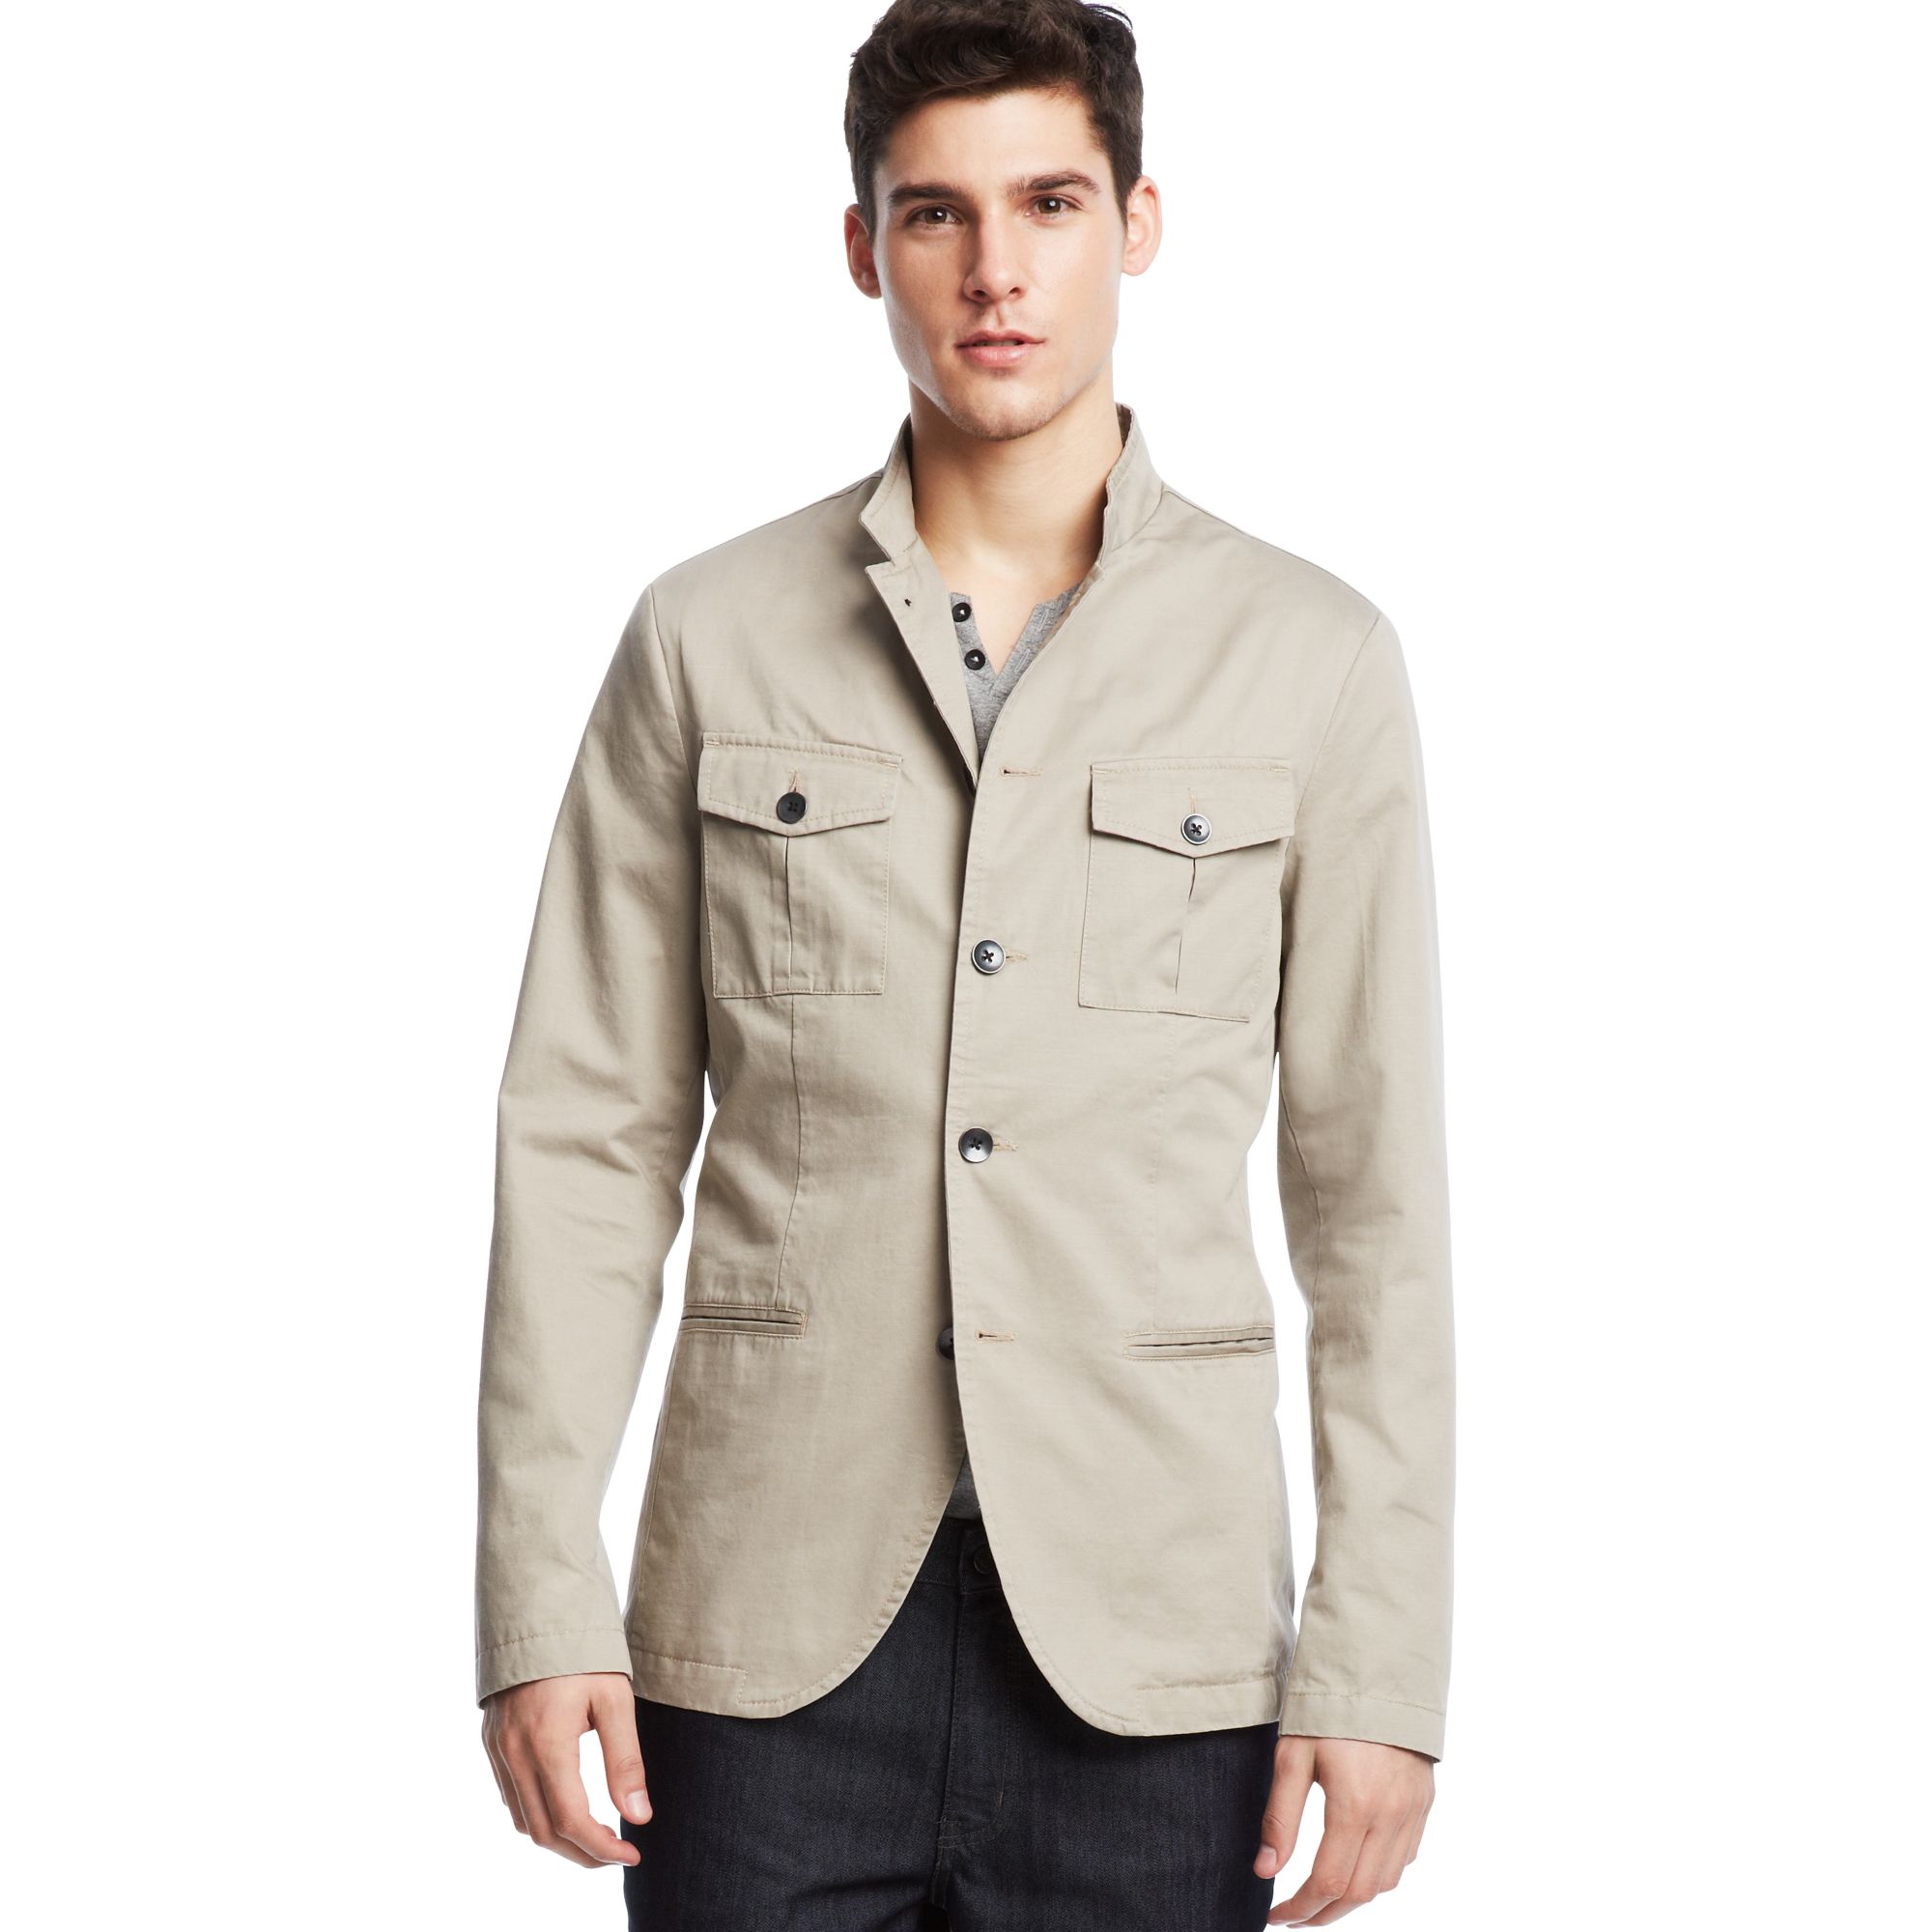 Lyst - Kenneth Cole Reaction Four Patch Pocket Blazer in Gray for Men